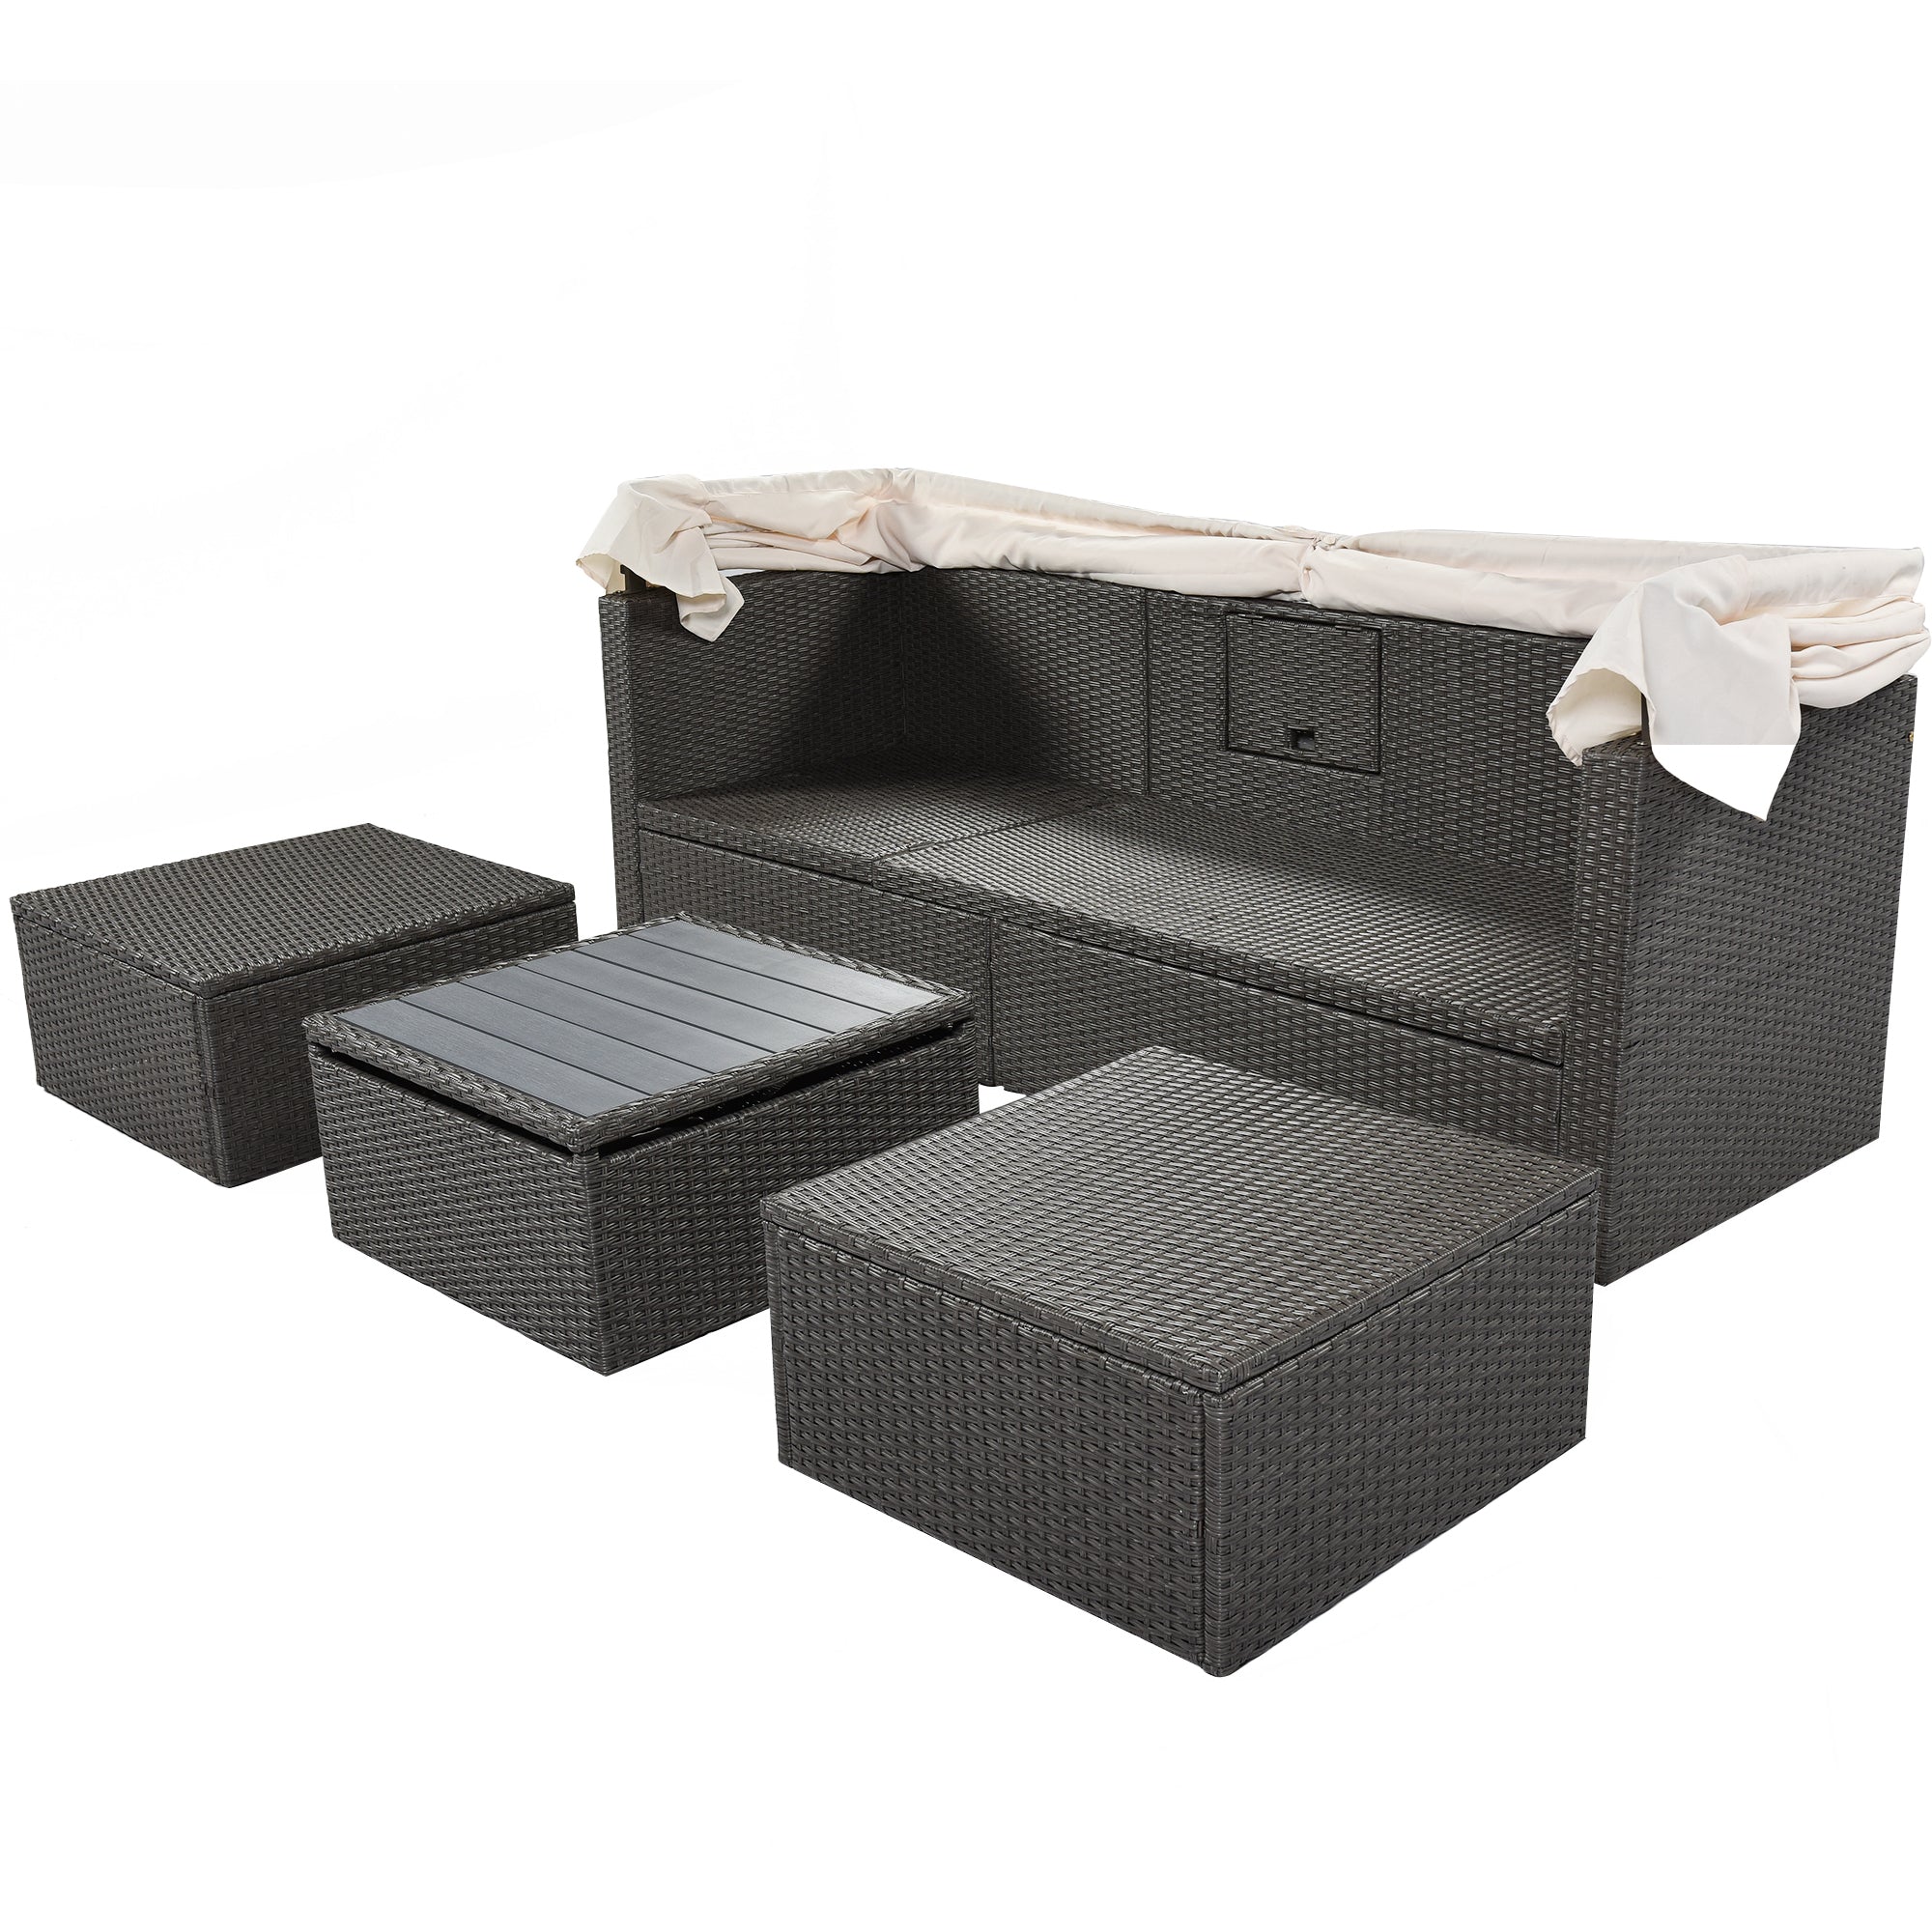 Outdoor Rectangle Daybed with Retractable Canopy, Cushions, Lifttop Coffee Table